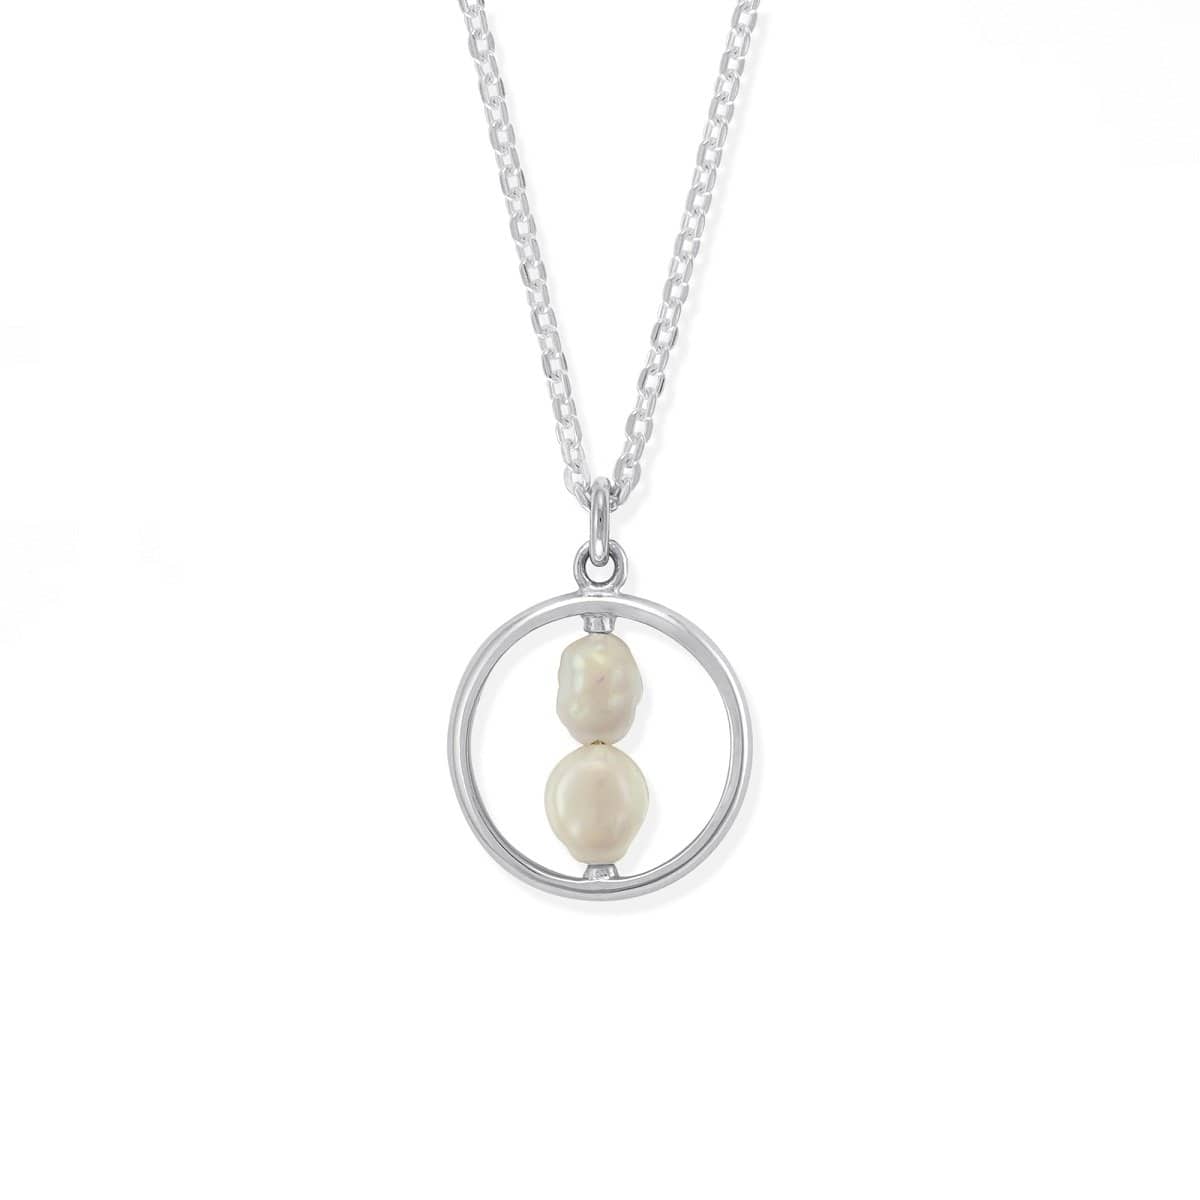 Boma Jewelry Necklaces Parel Double Pearl Necklace